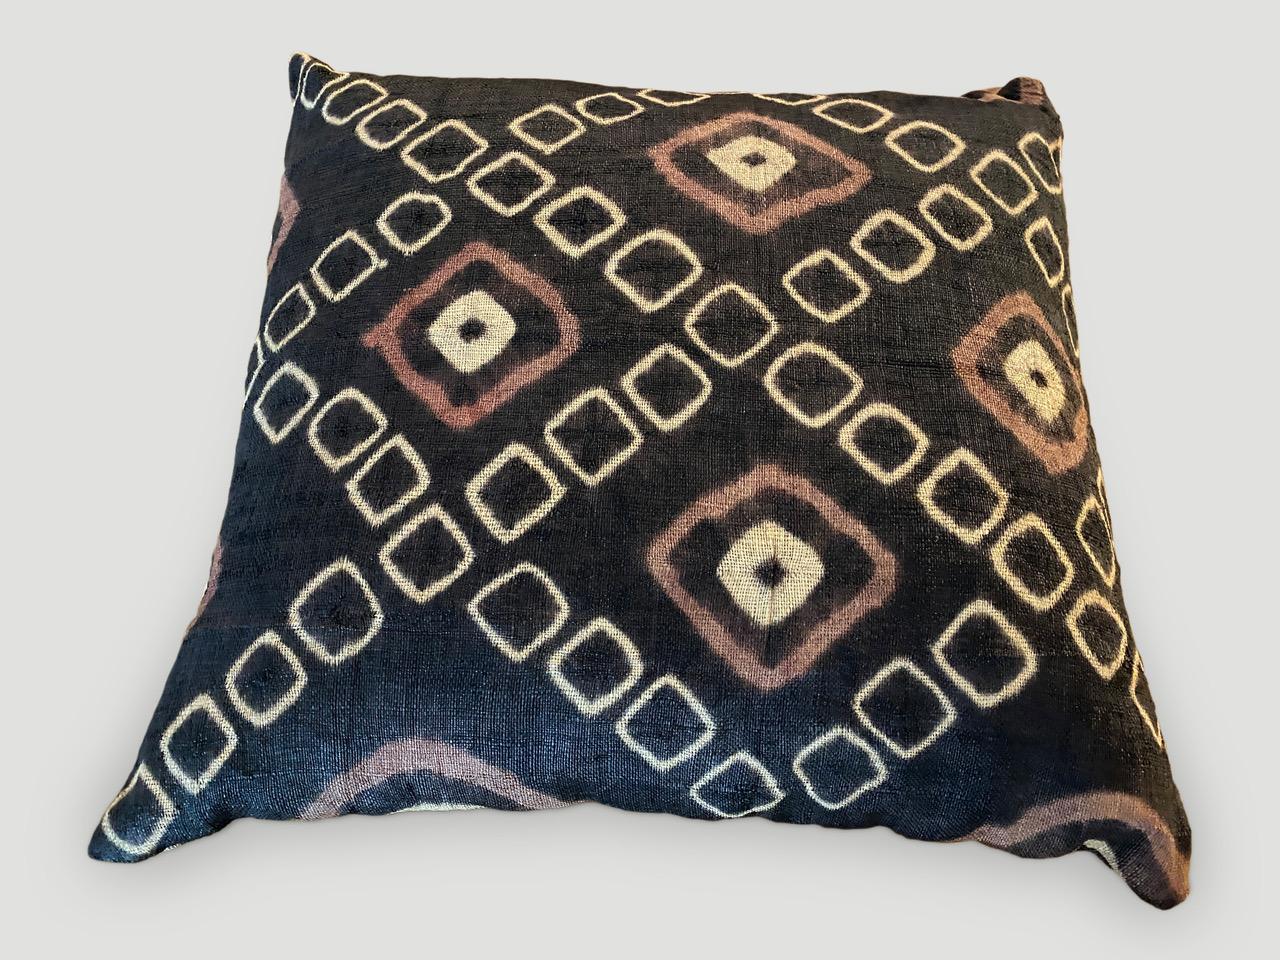 Striking double backed African resist dye raffia pillow made from a vintage textile. Geometric design in shades of brown, orange and natural. Concealed zipper and inserts included. Circa 1950.

Andrianna Shamaris. The Leader In Modern Organic